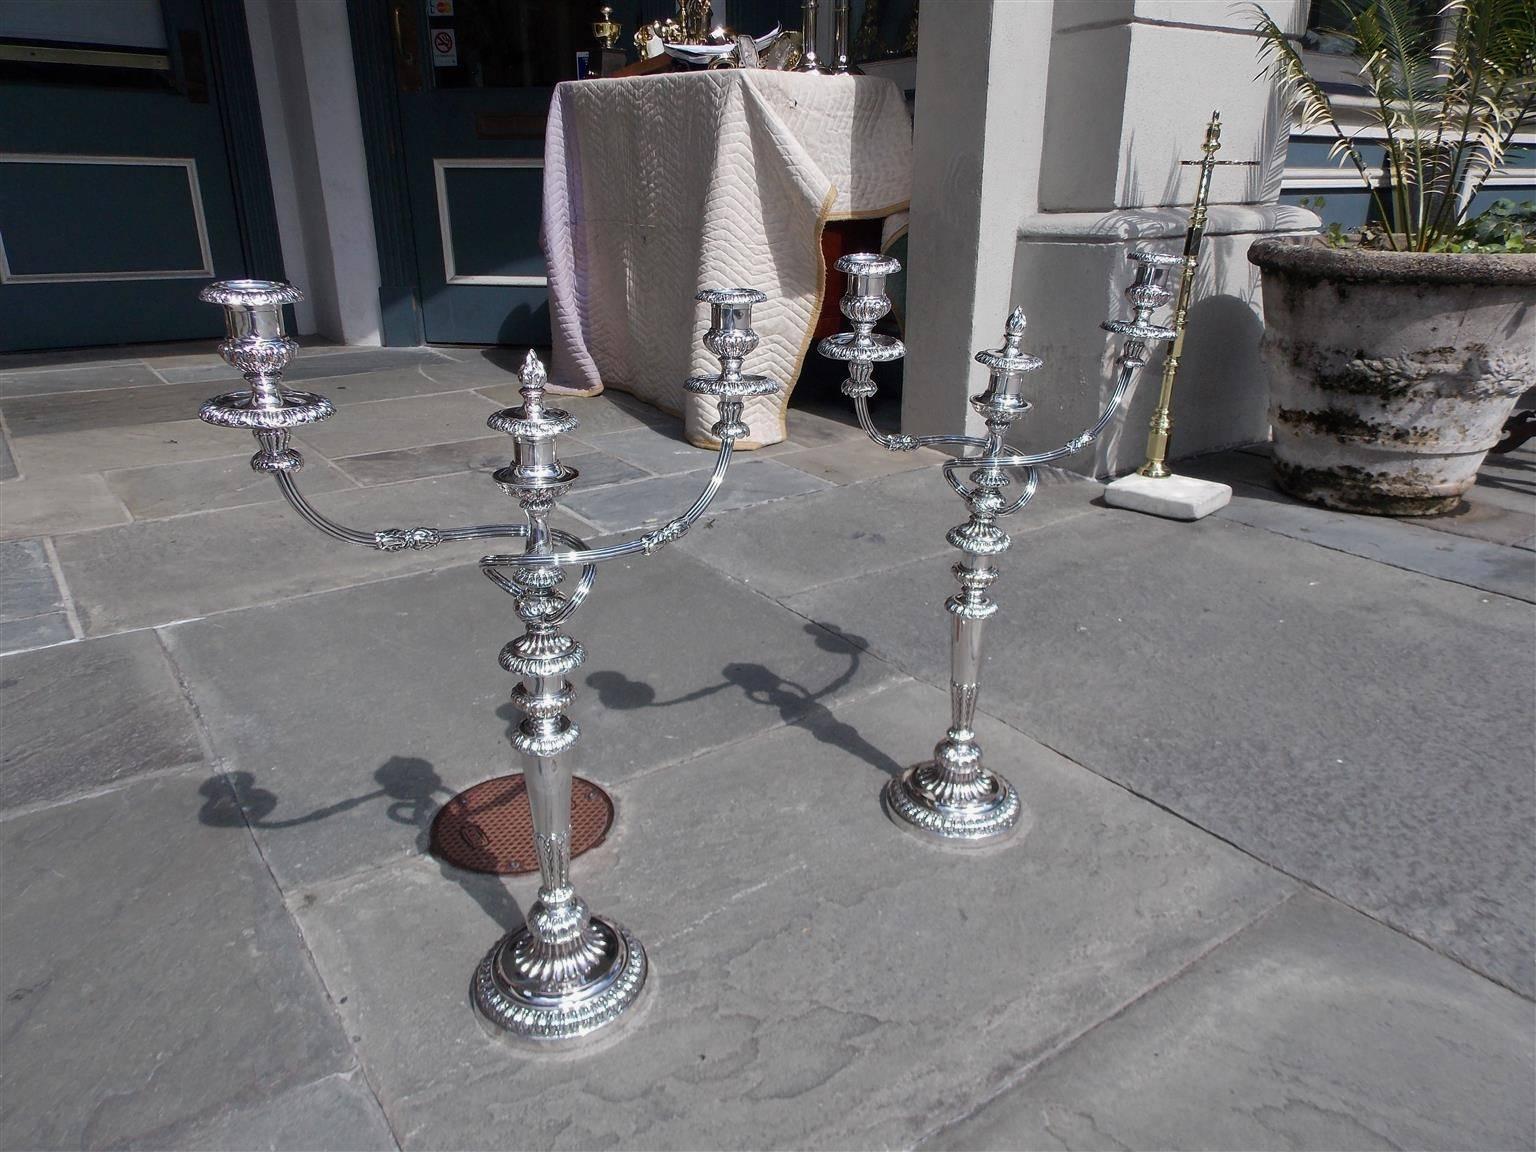 A complete pair of English Regency Sheffield three-light candelabras with intertwined scrolled arms, flame centered removable finials, original hand chased bobeches, centered engraved swan coat of arms, resting on circular fluted gadrooned bases.